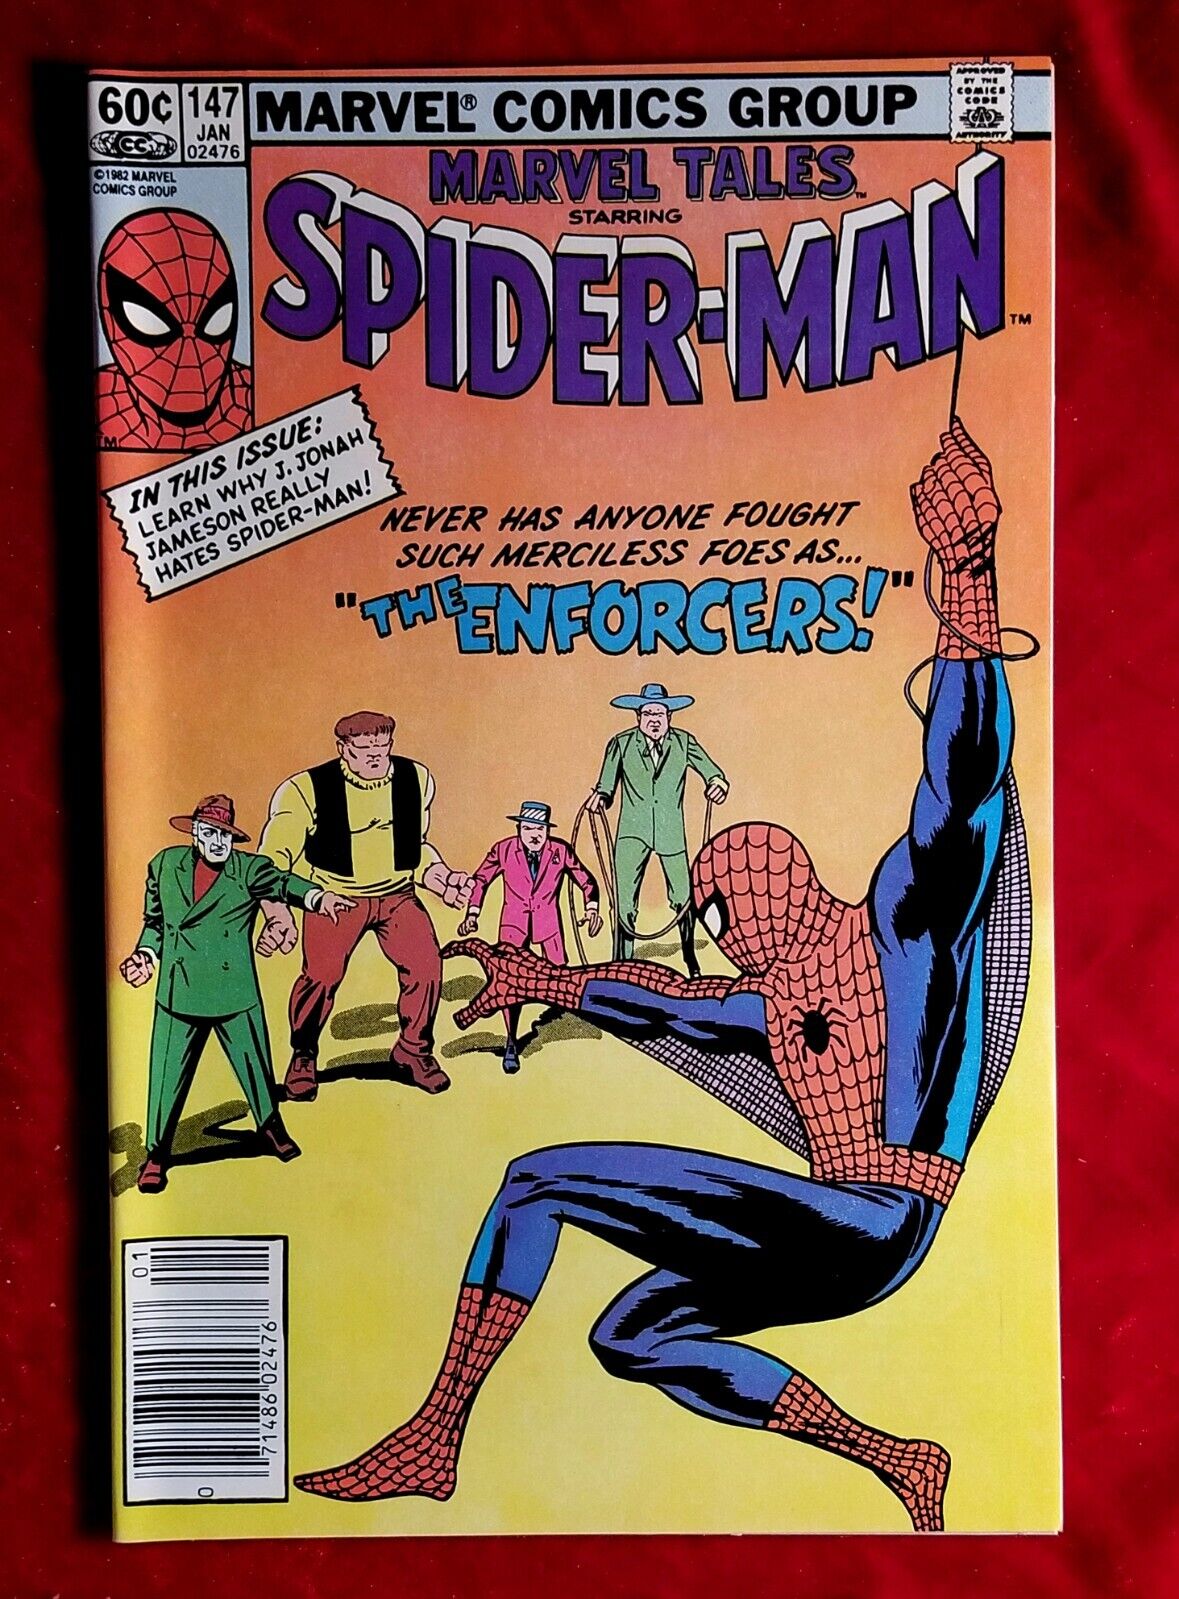 1982 Marvel Tales Spider-Man 147 NM+ The Enforcers reprint App NEWSSTAND